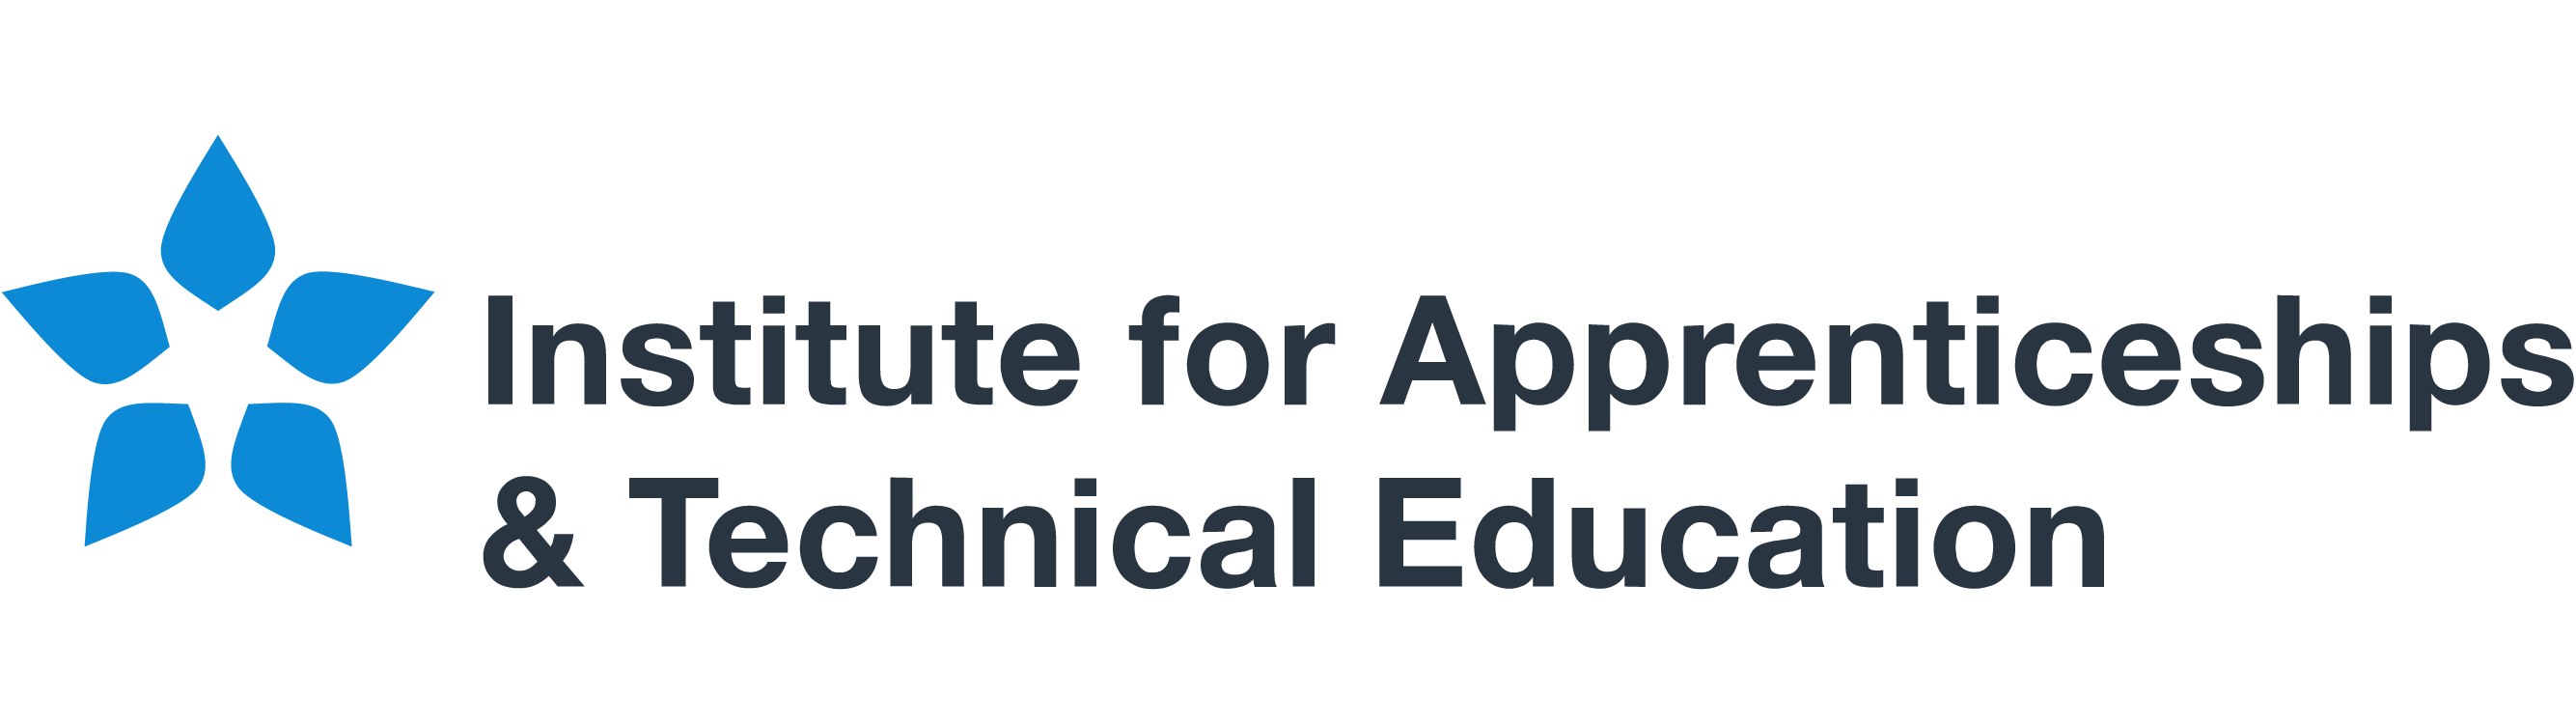 View on the Institute for Apprenticeships and Technical Education website